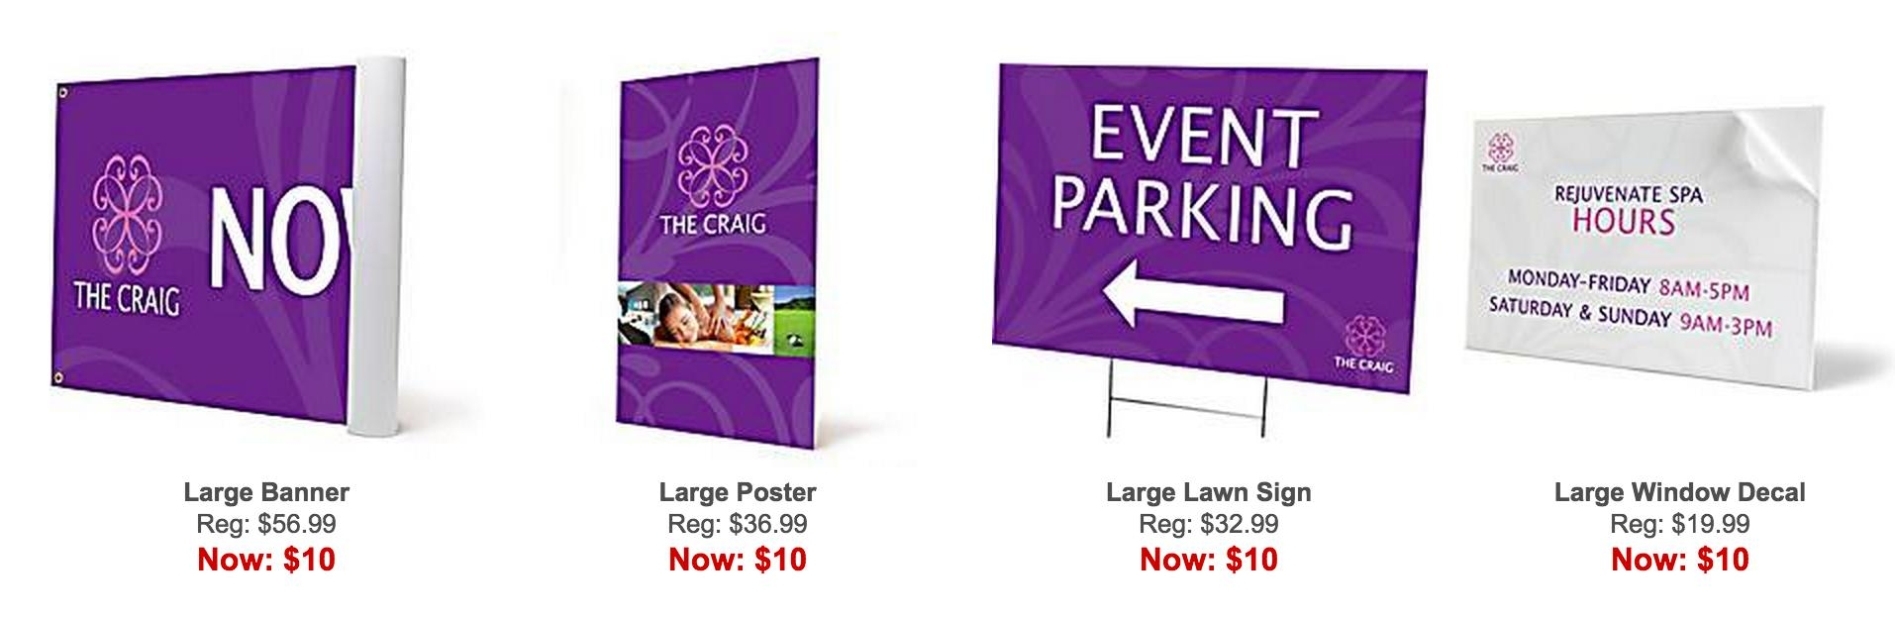 Large Banners, Posters And Signs For $10 At Staples - Ship Saves Throughout Staples Banner Template